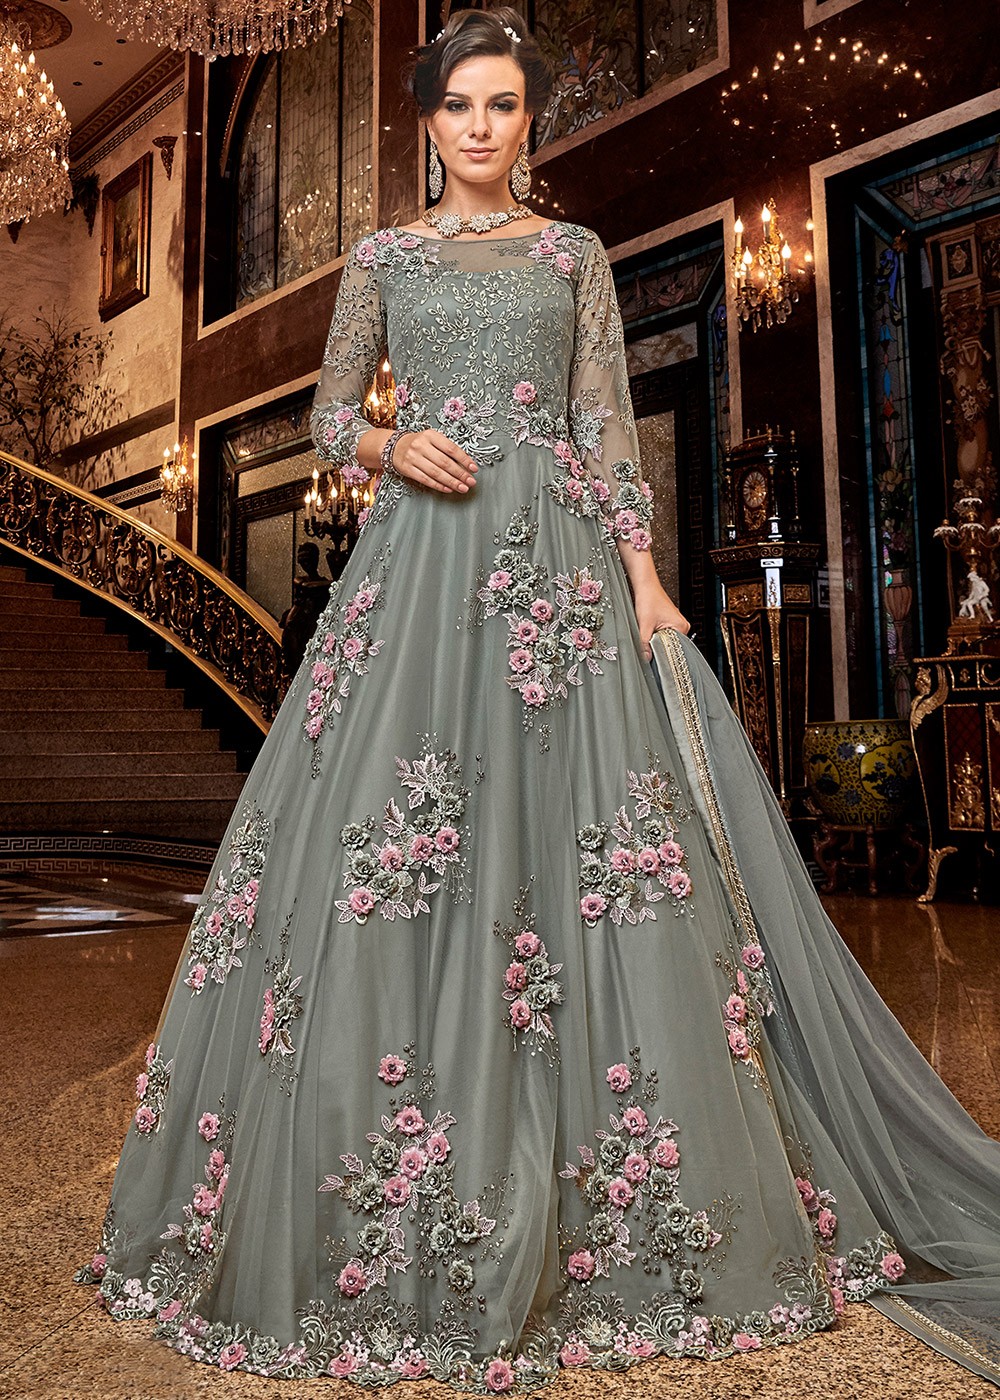 Elegance Personified: Royal Blue Anarkali Gown with Exquisite Net and Soft  Silk for Weddings and Parties | Party wear indian dresses, Designer gowns,  Anarkali gown